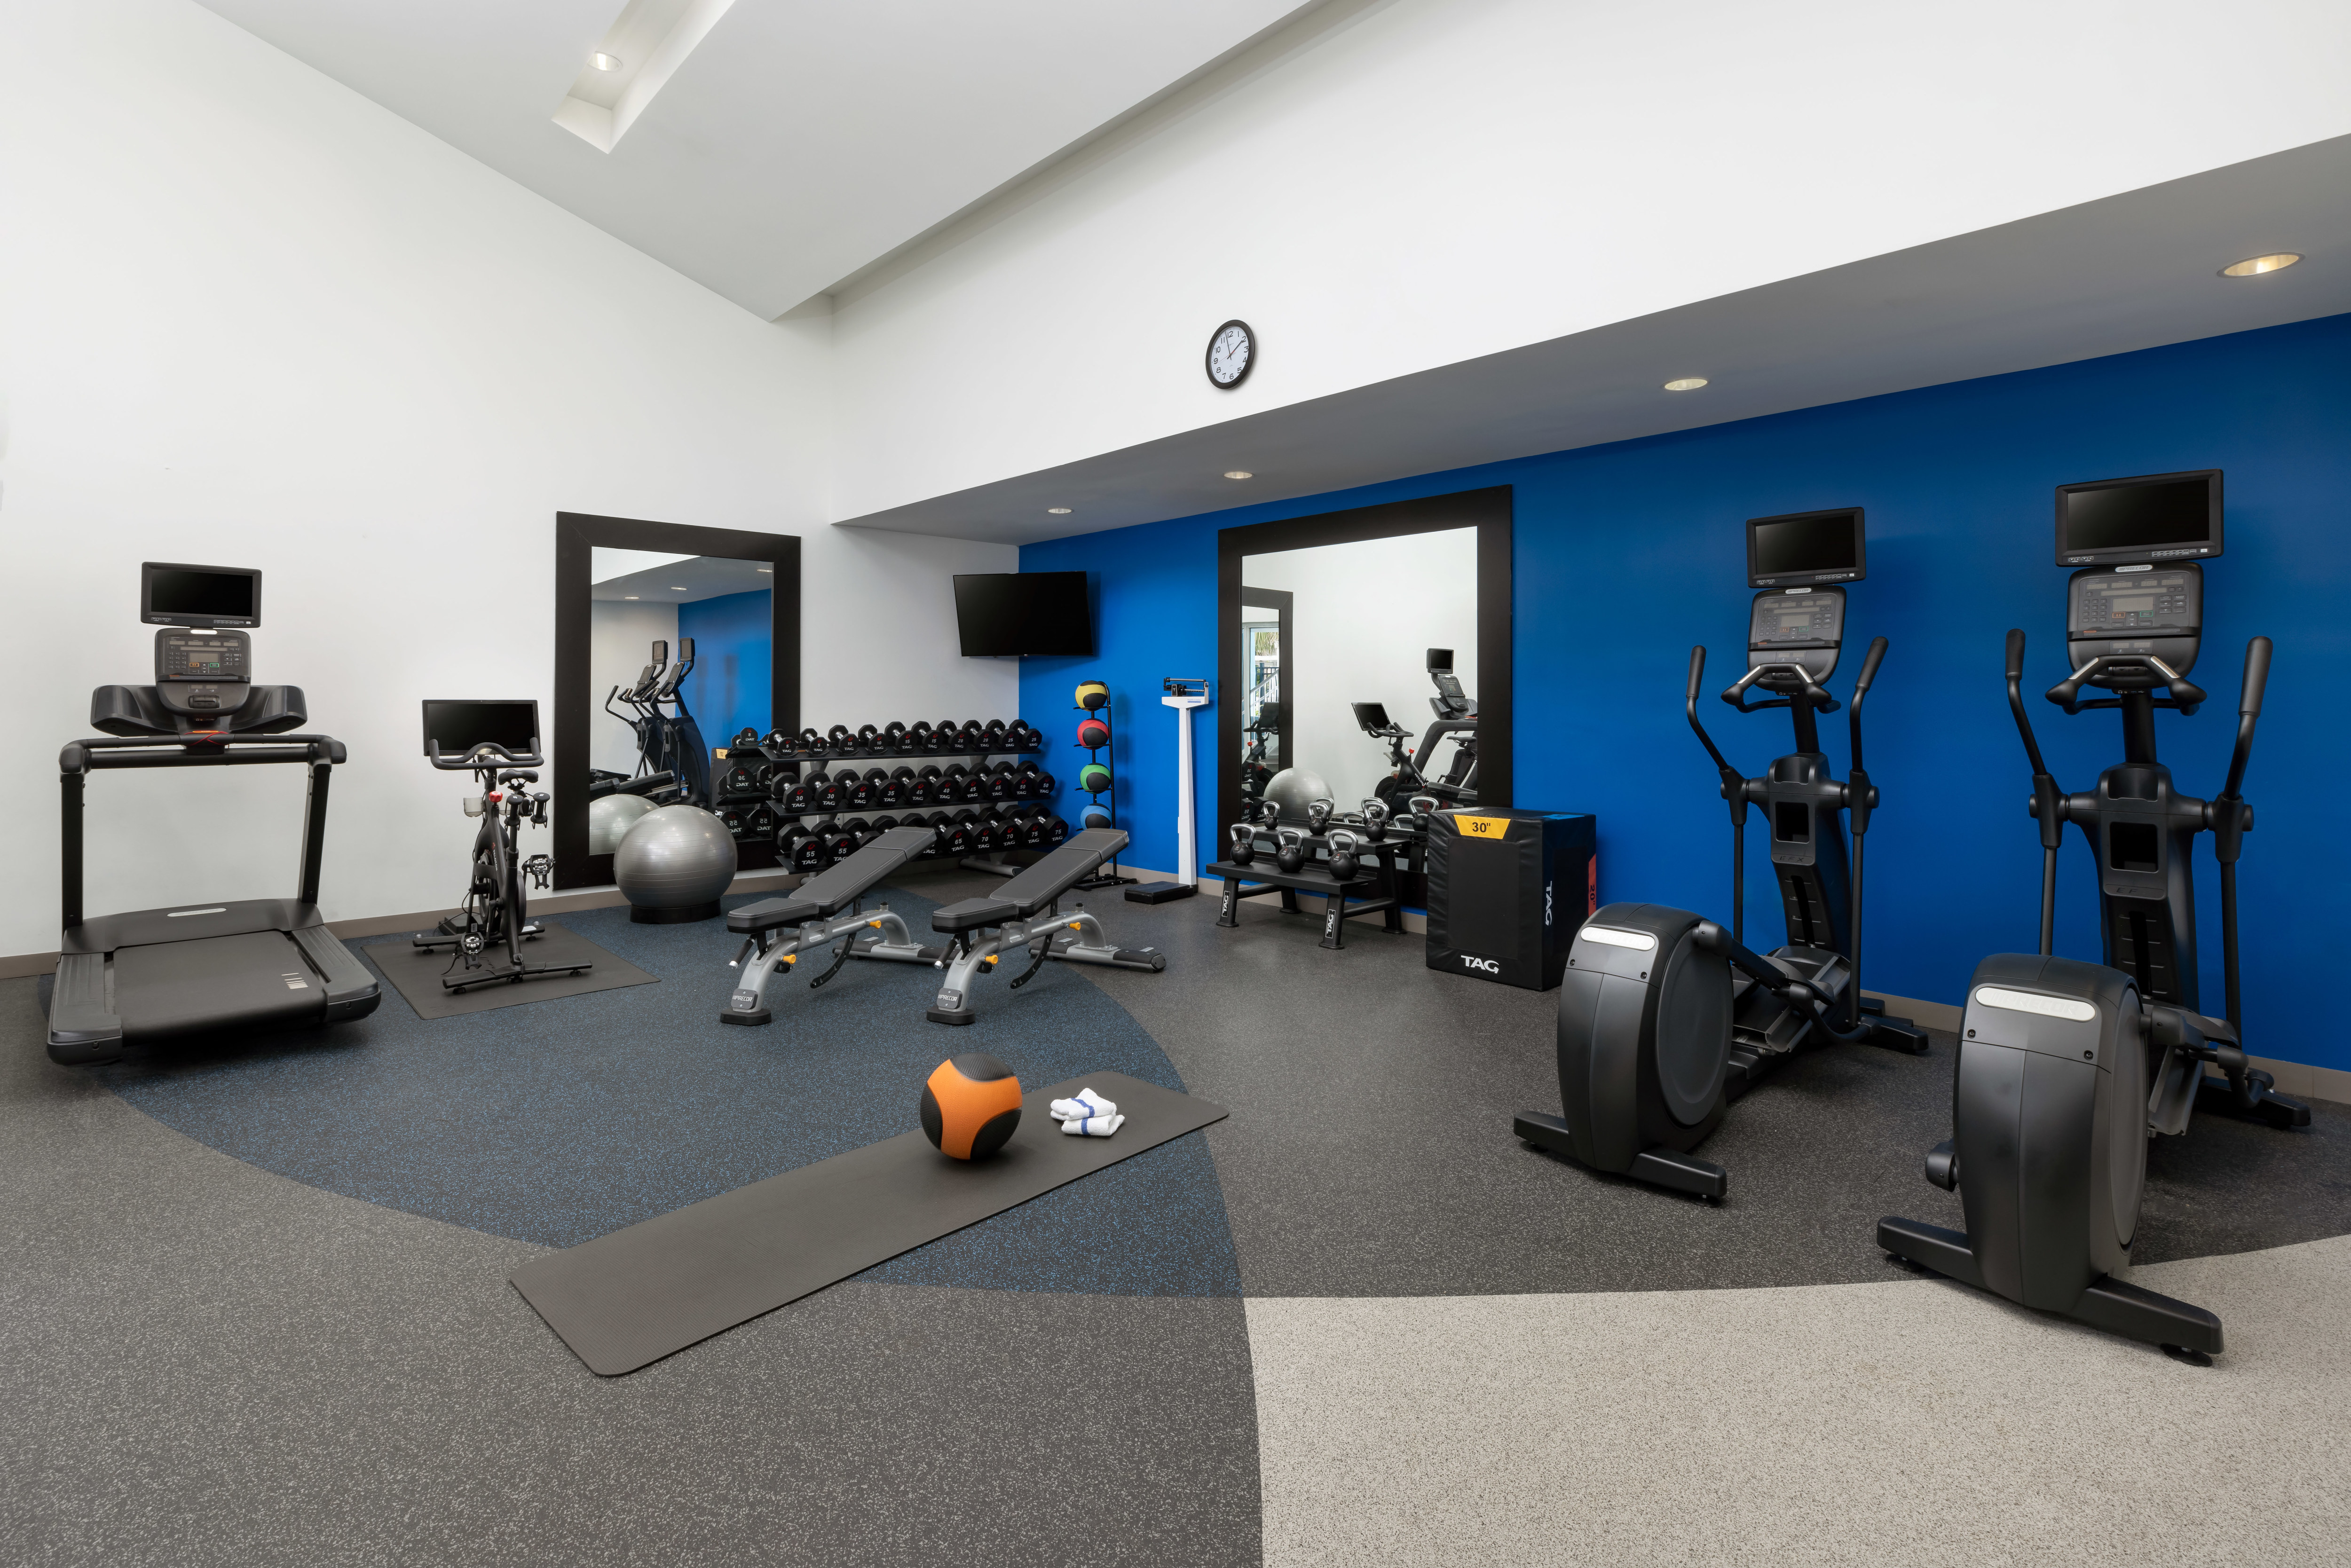 Weights, Treadmills and Recumbent Bikes in Fitness Center